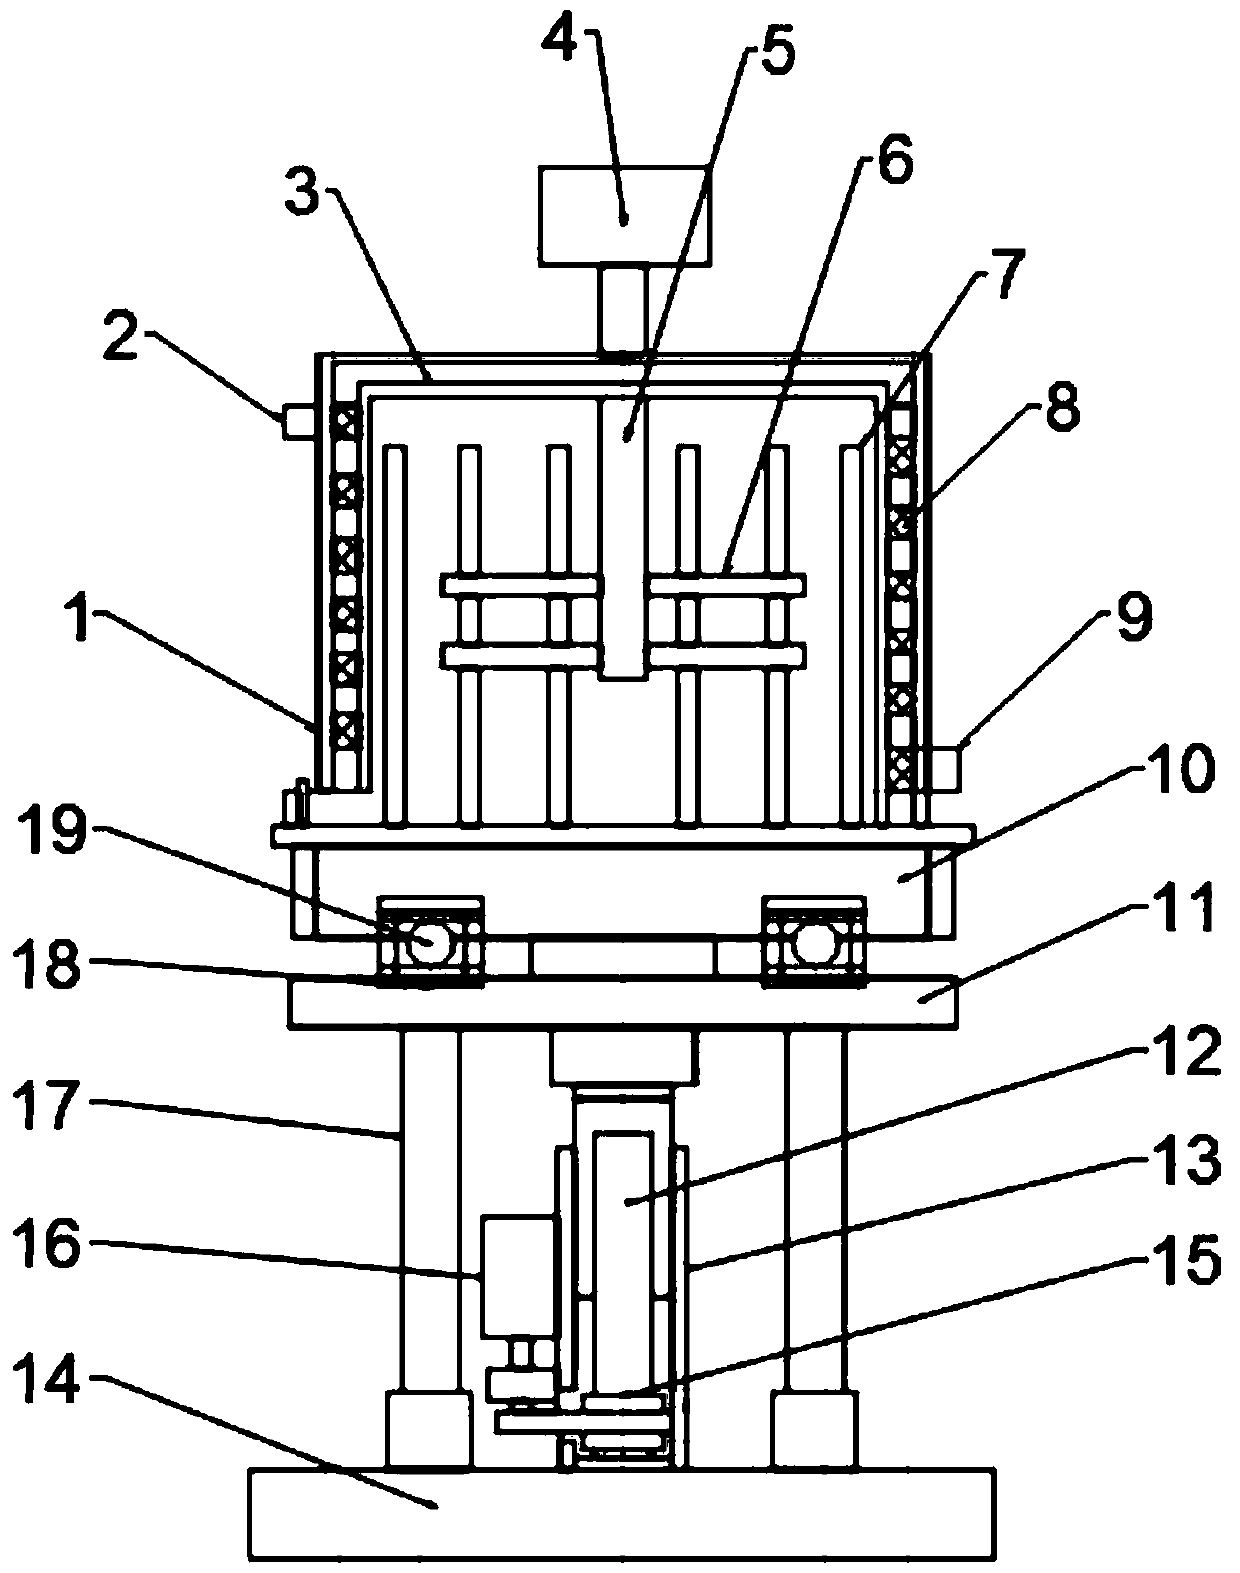 Lift-type architectural coating stirring device